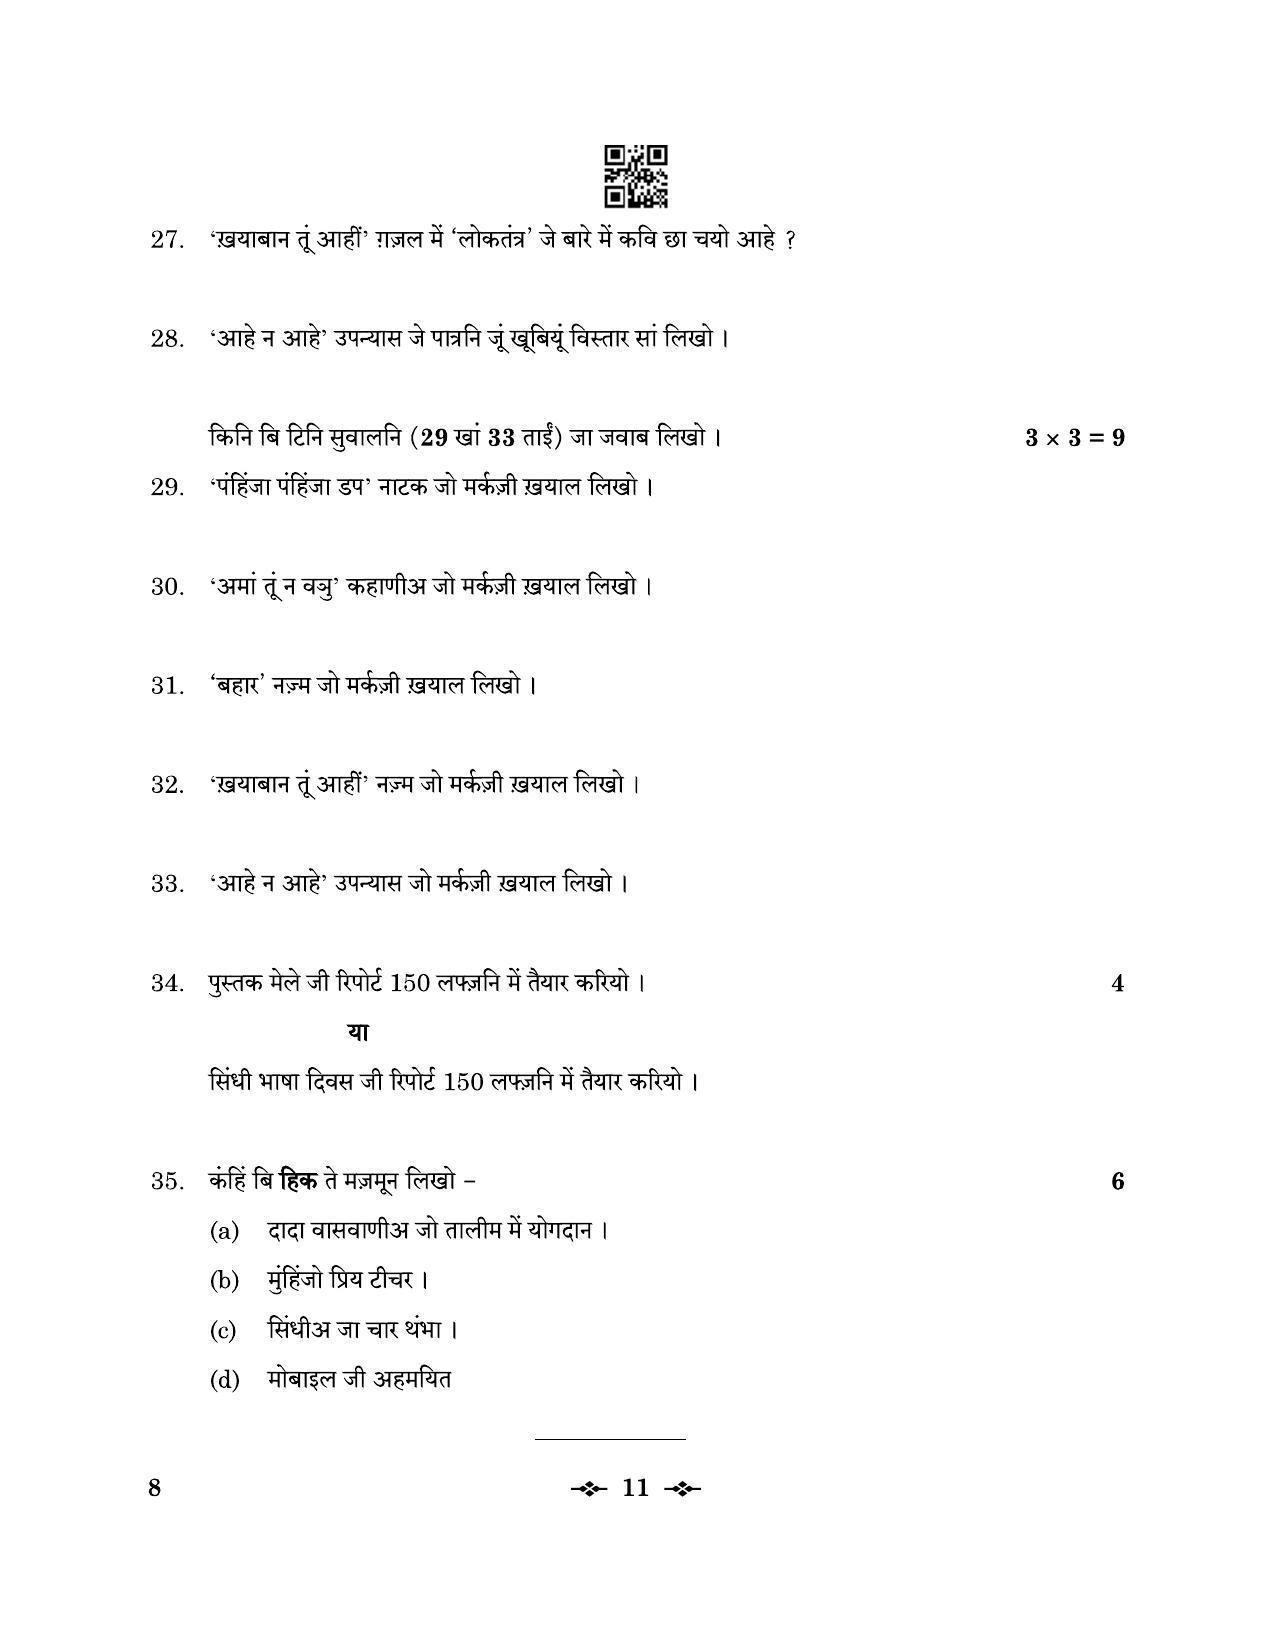 CBSE Class 12 8_Sindhi 2023 Question Paper - Page 11